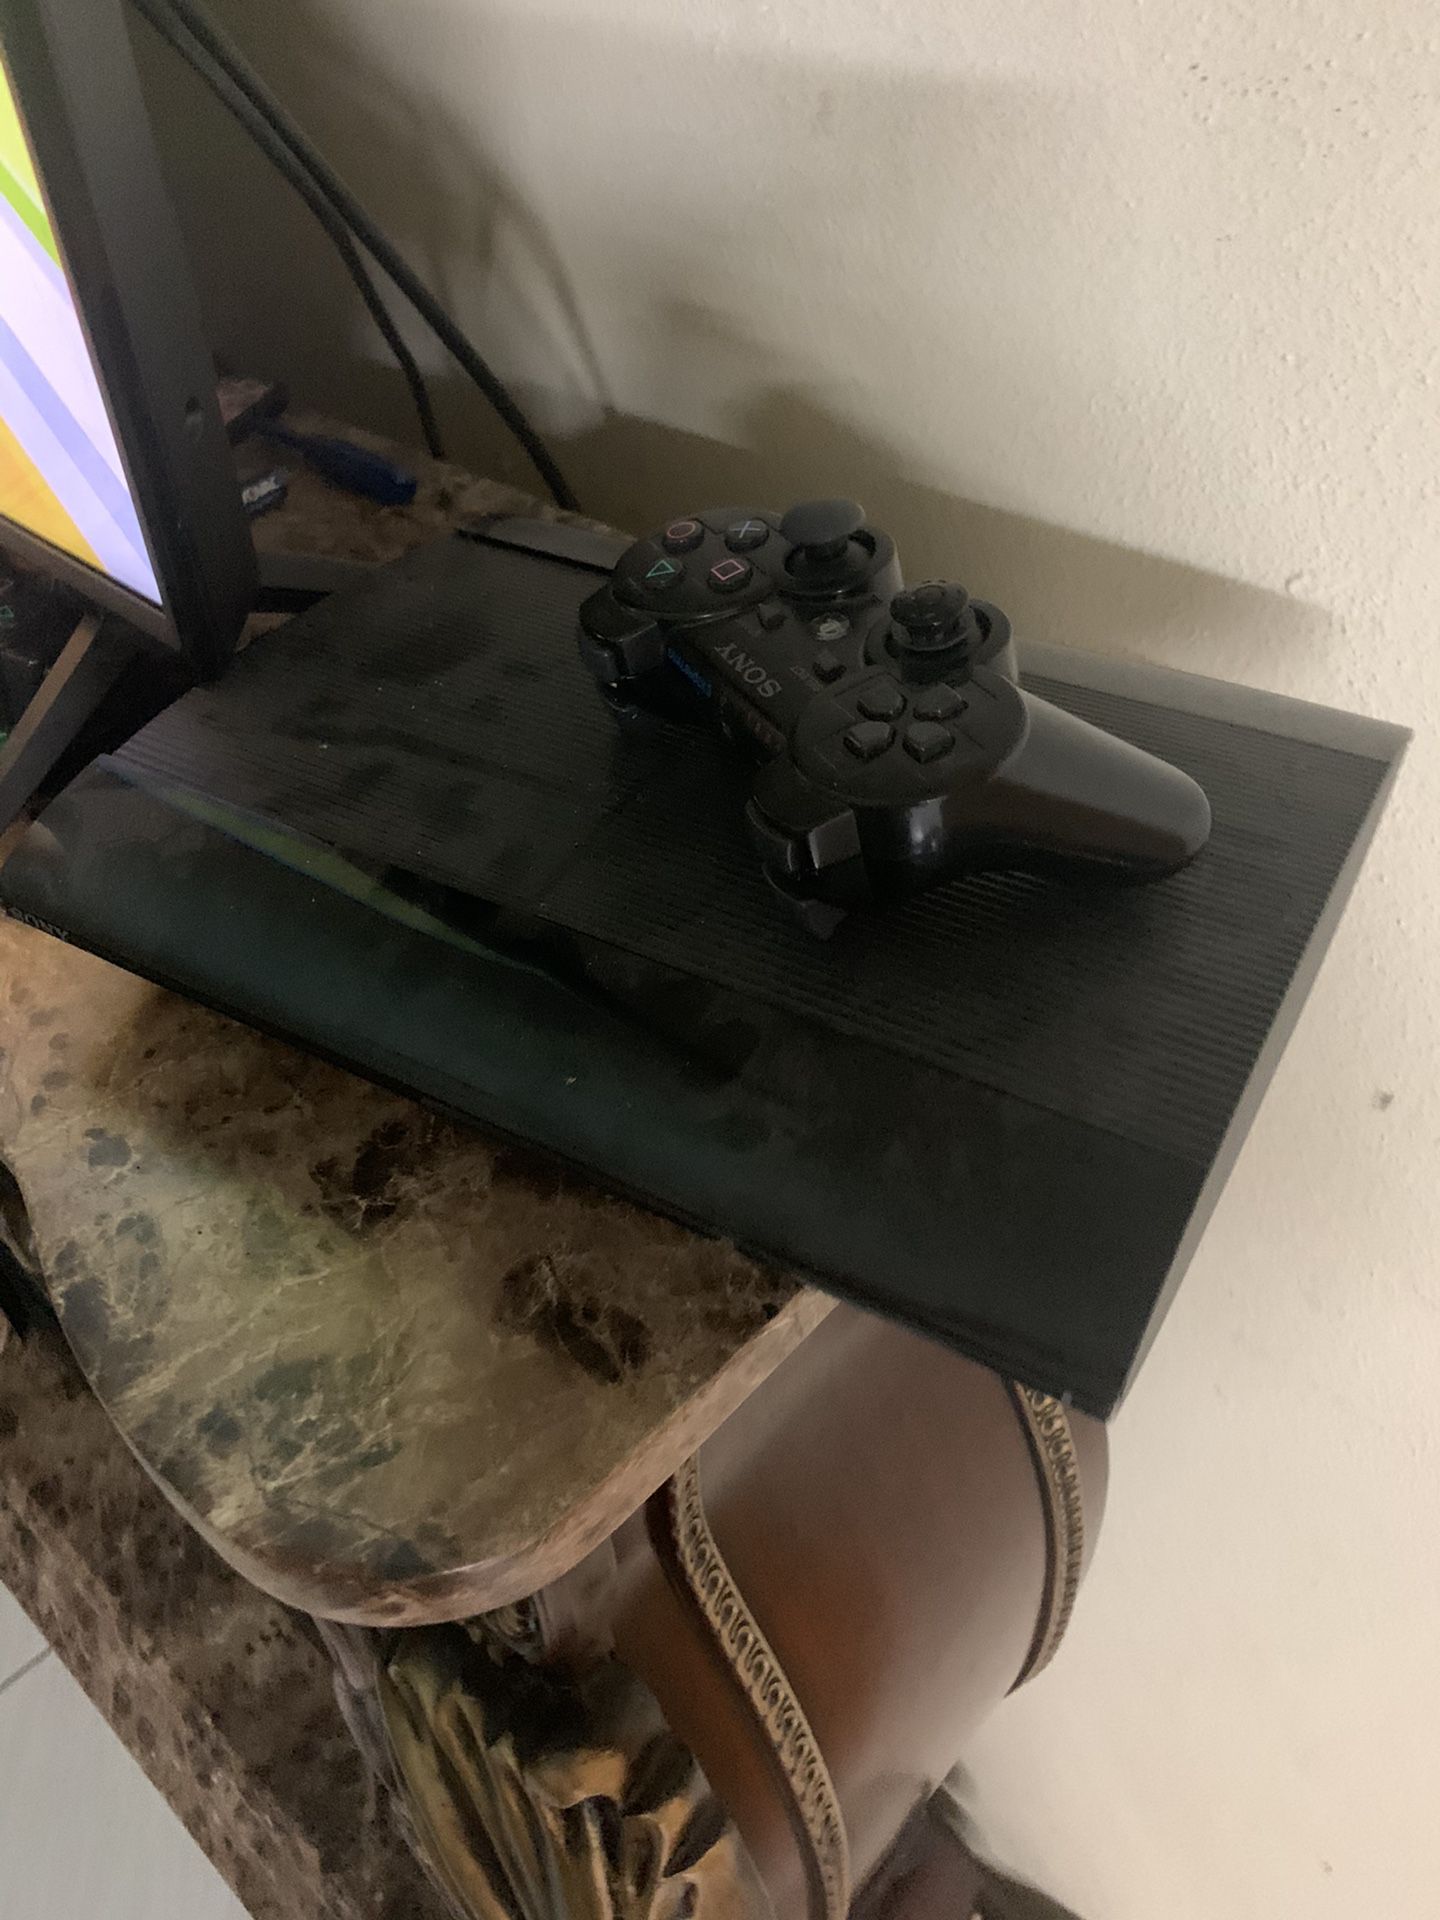 Ps3 with 3 controllers and 2 games.